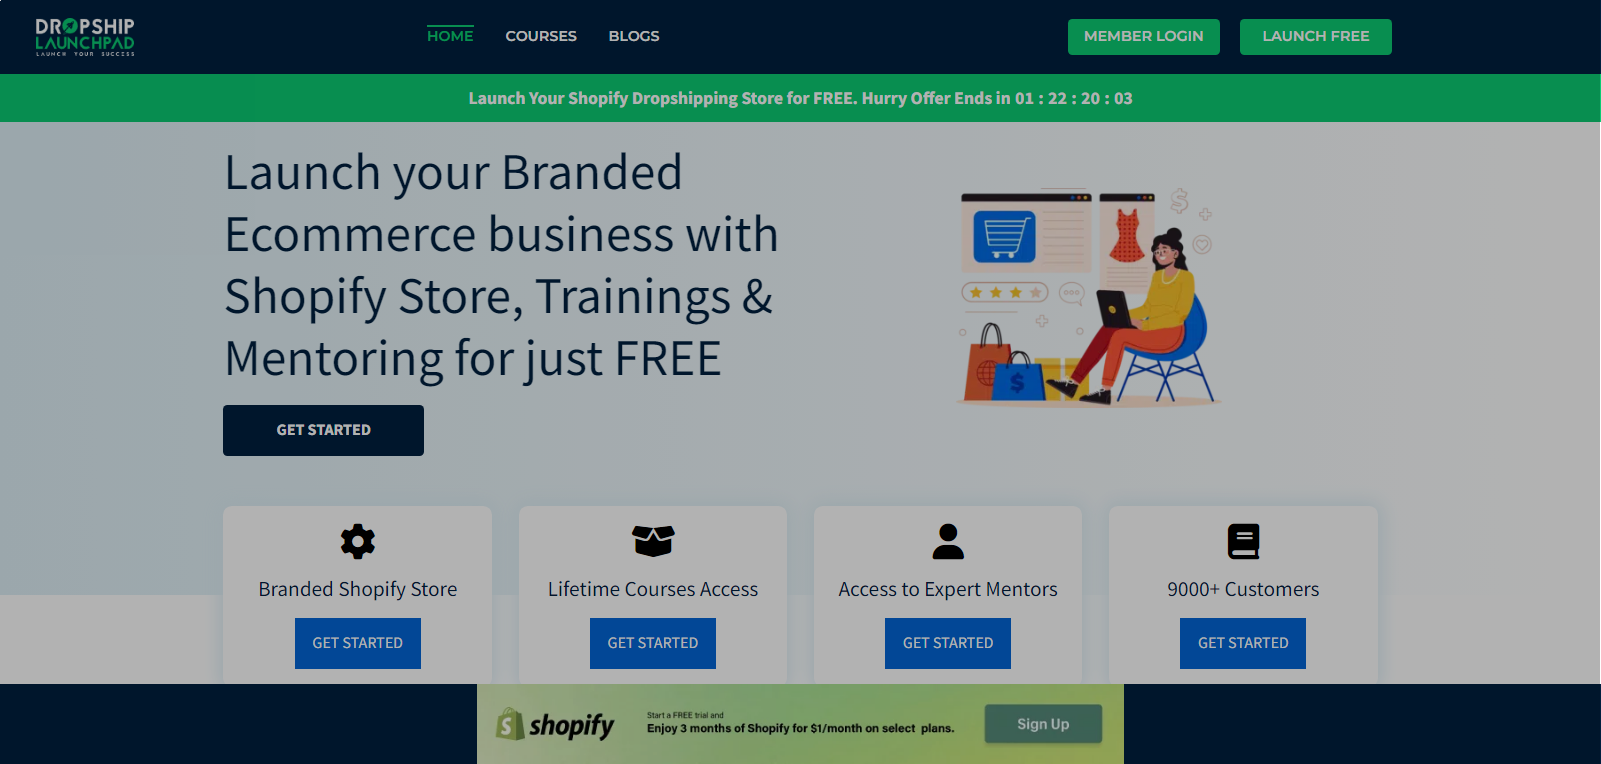 How to Get the Best Beauty Dropshipping Products Store from Dropship Launchpad for Free: